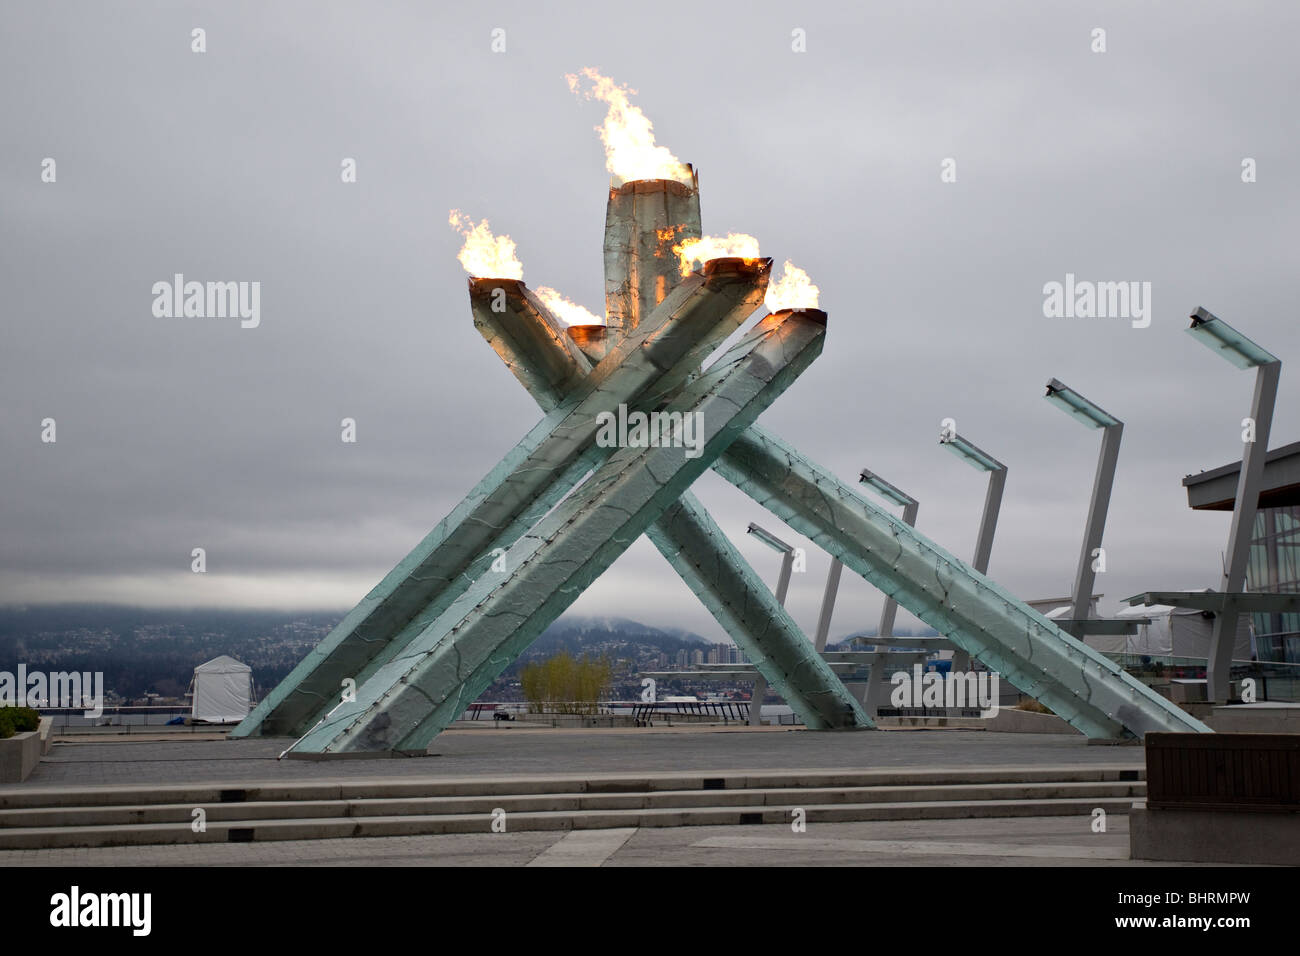 The Olympic Flame in it's fenced in location at the 2010 Olympic Winter Games, Vancouver, British Columbia Stock Photo